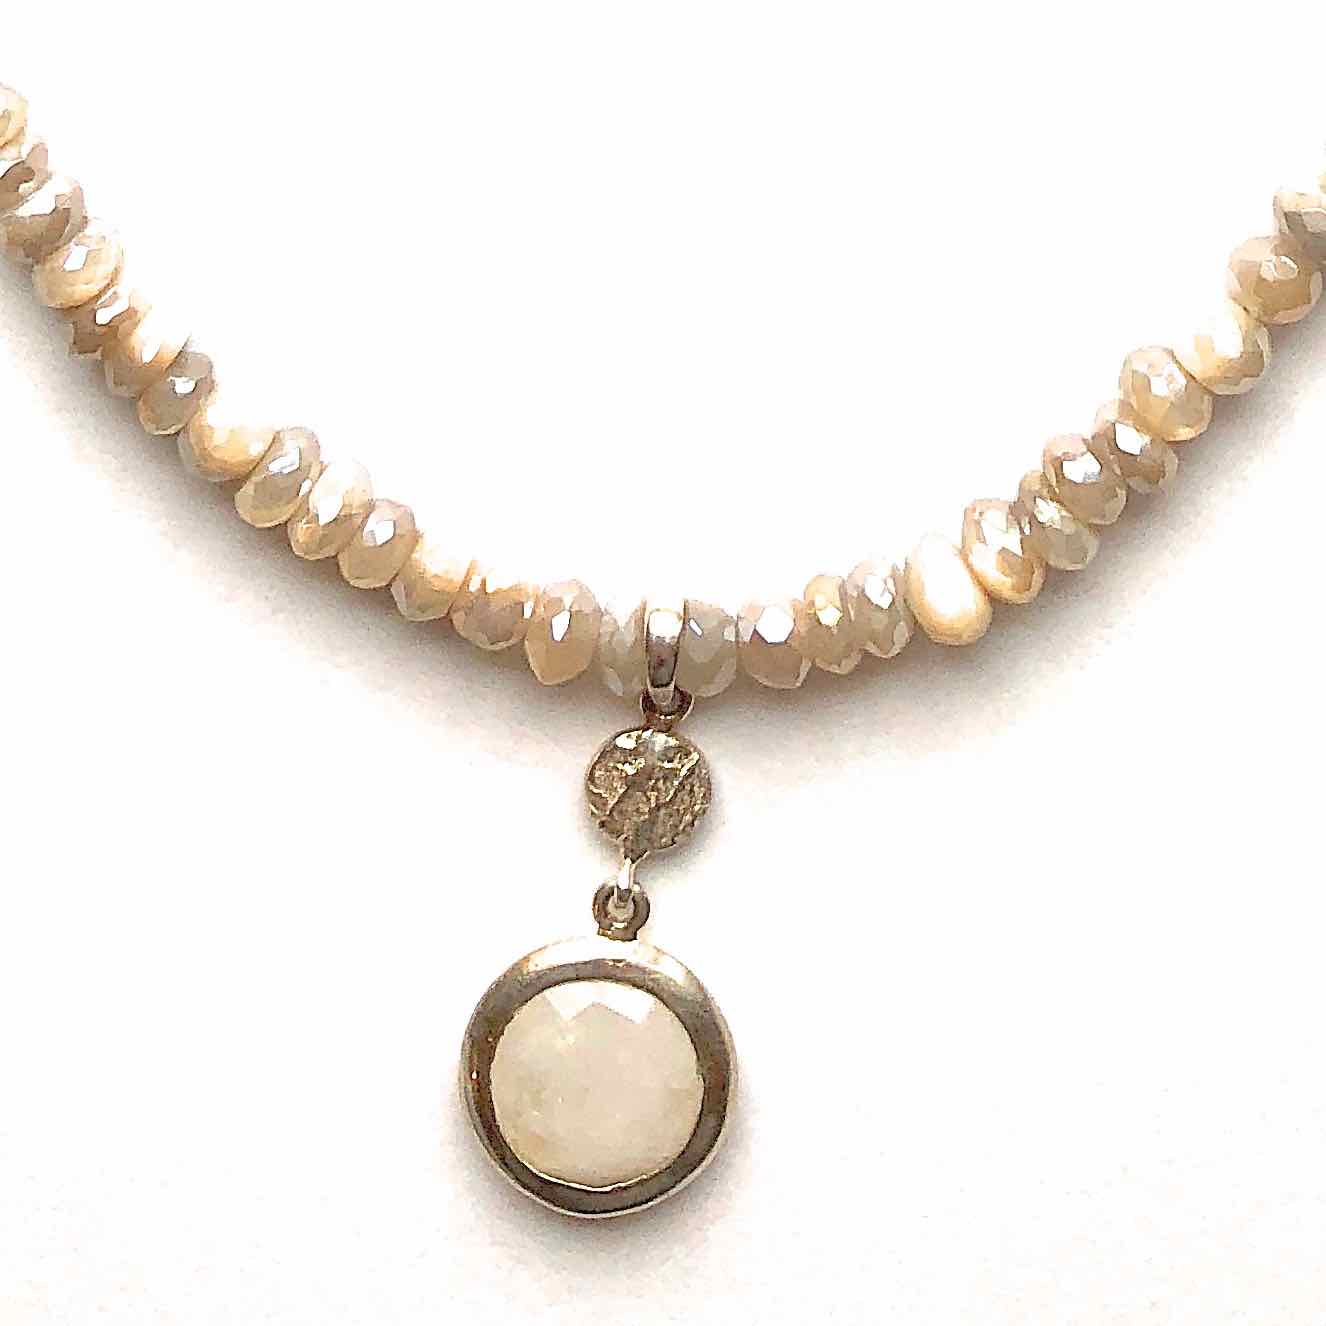 Moonstone Necklace with Moonstone and Silver Drop Pendant